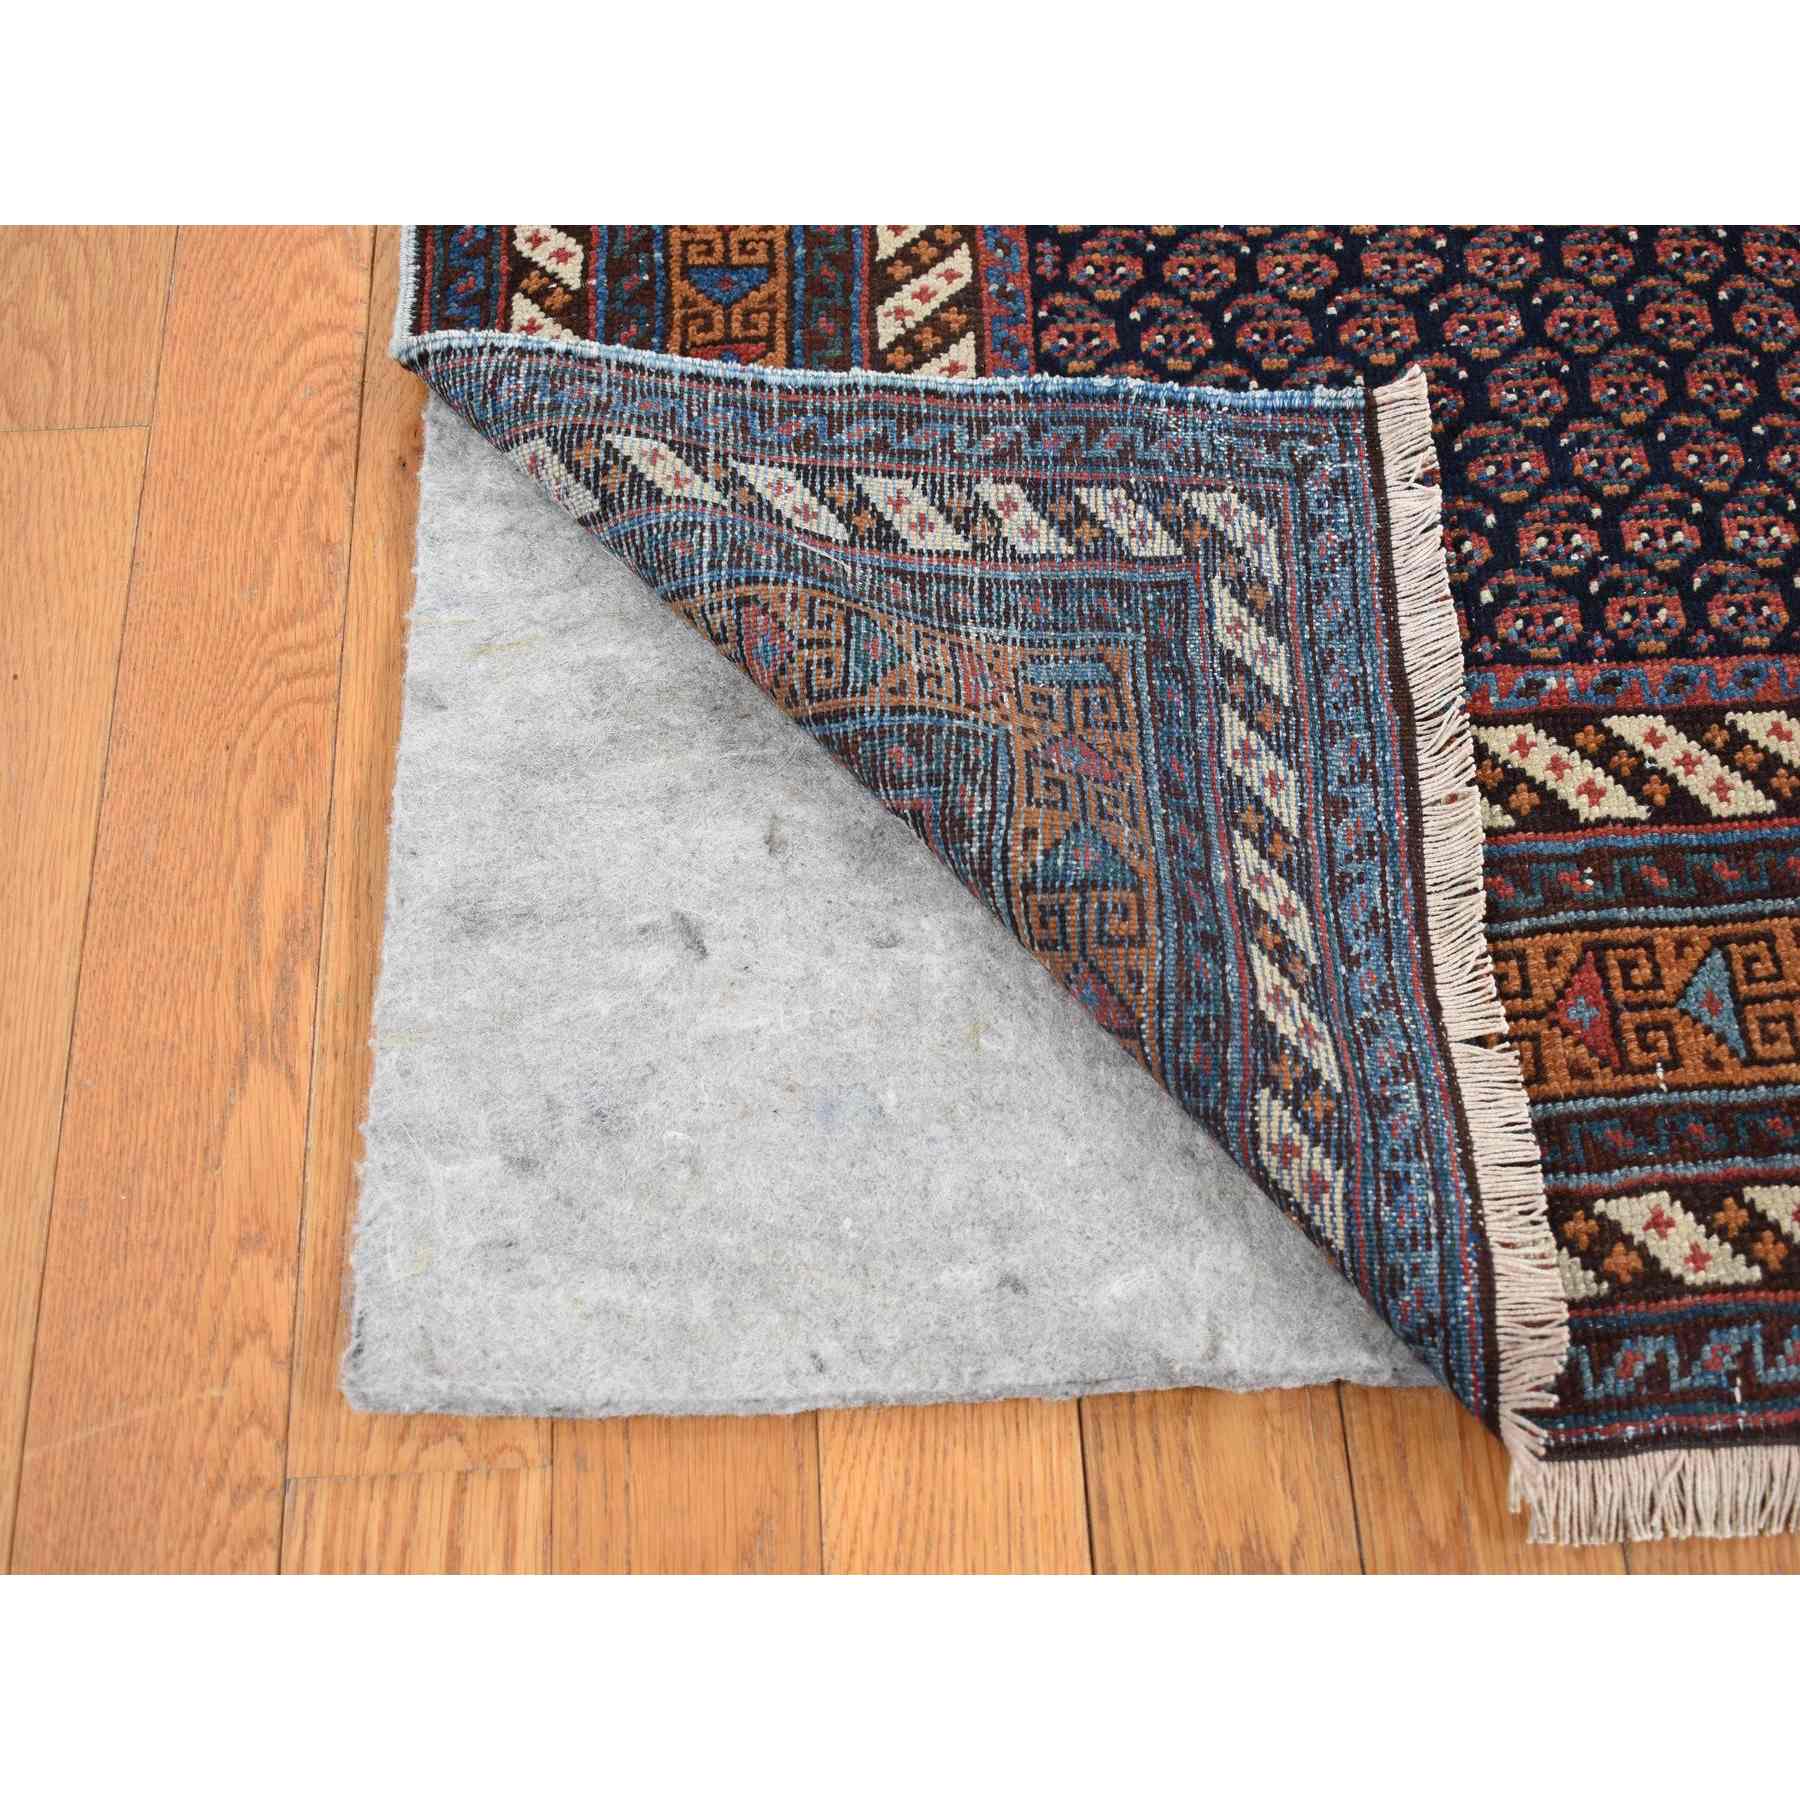 Antique-Hand-Knotted-Rug-437020